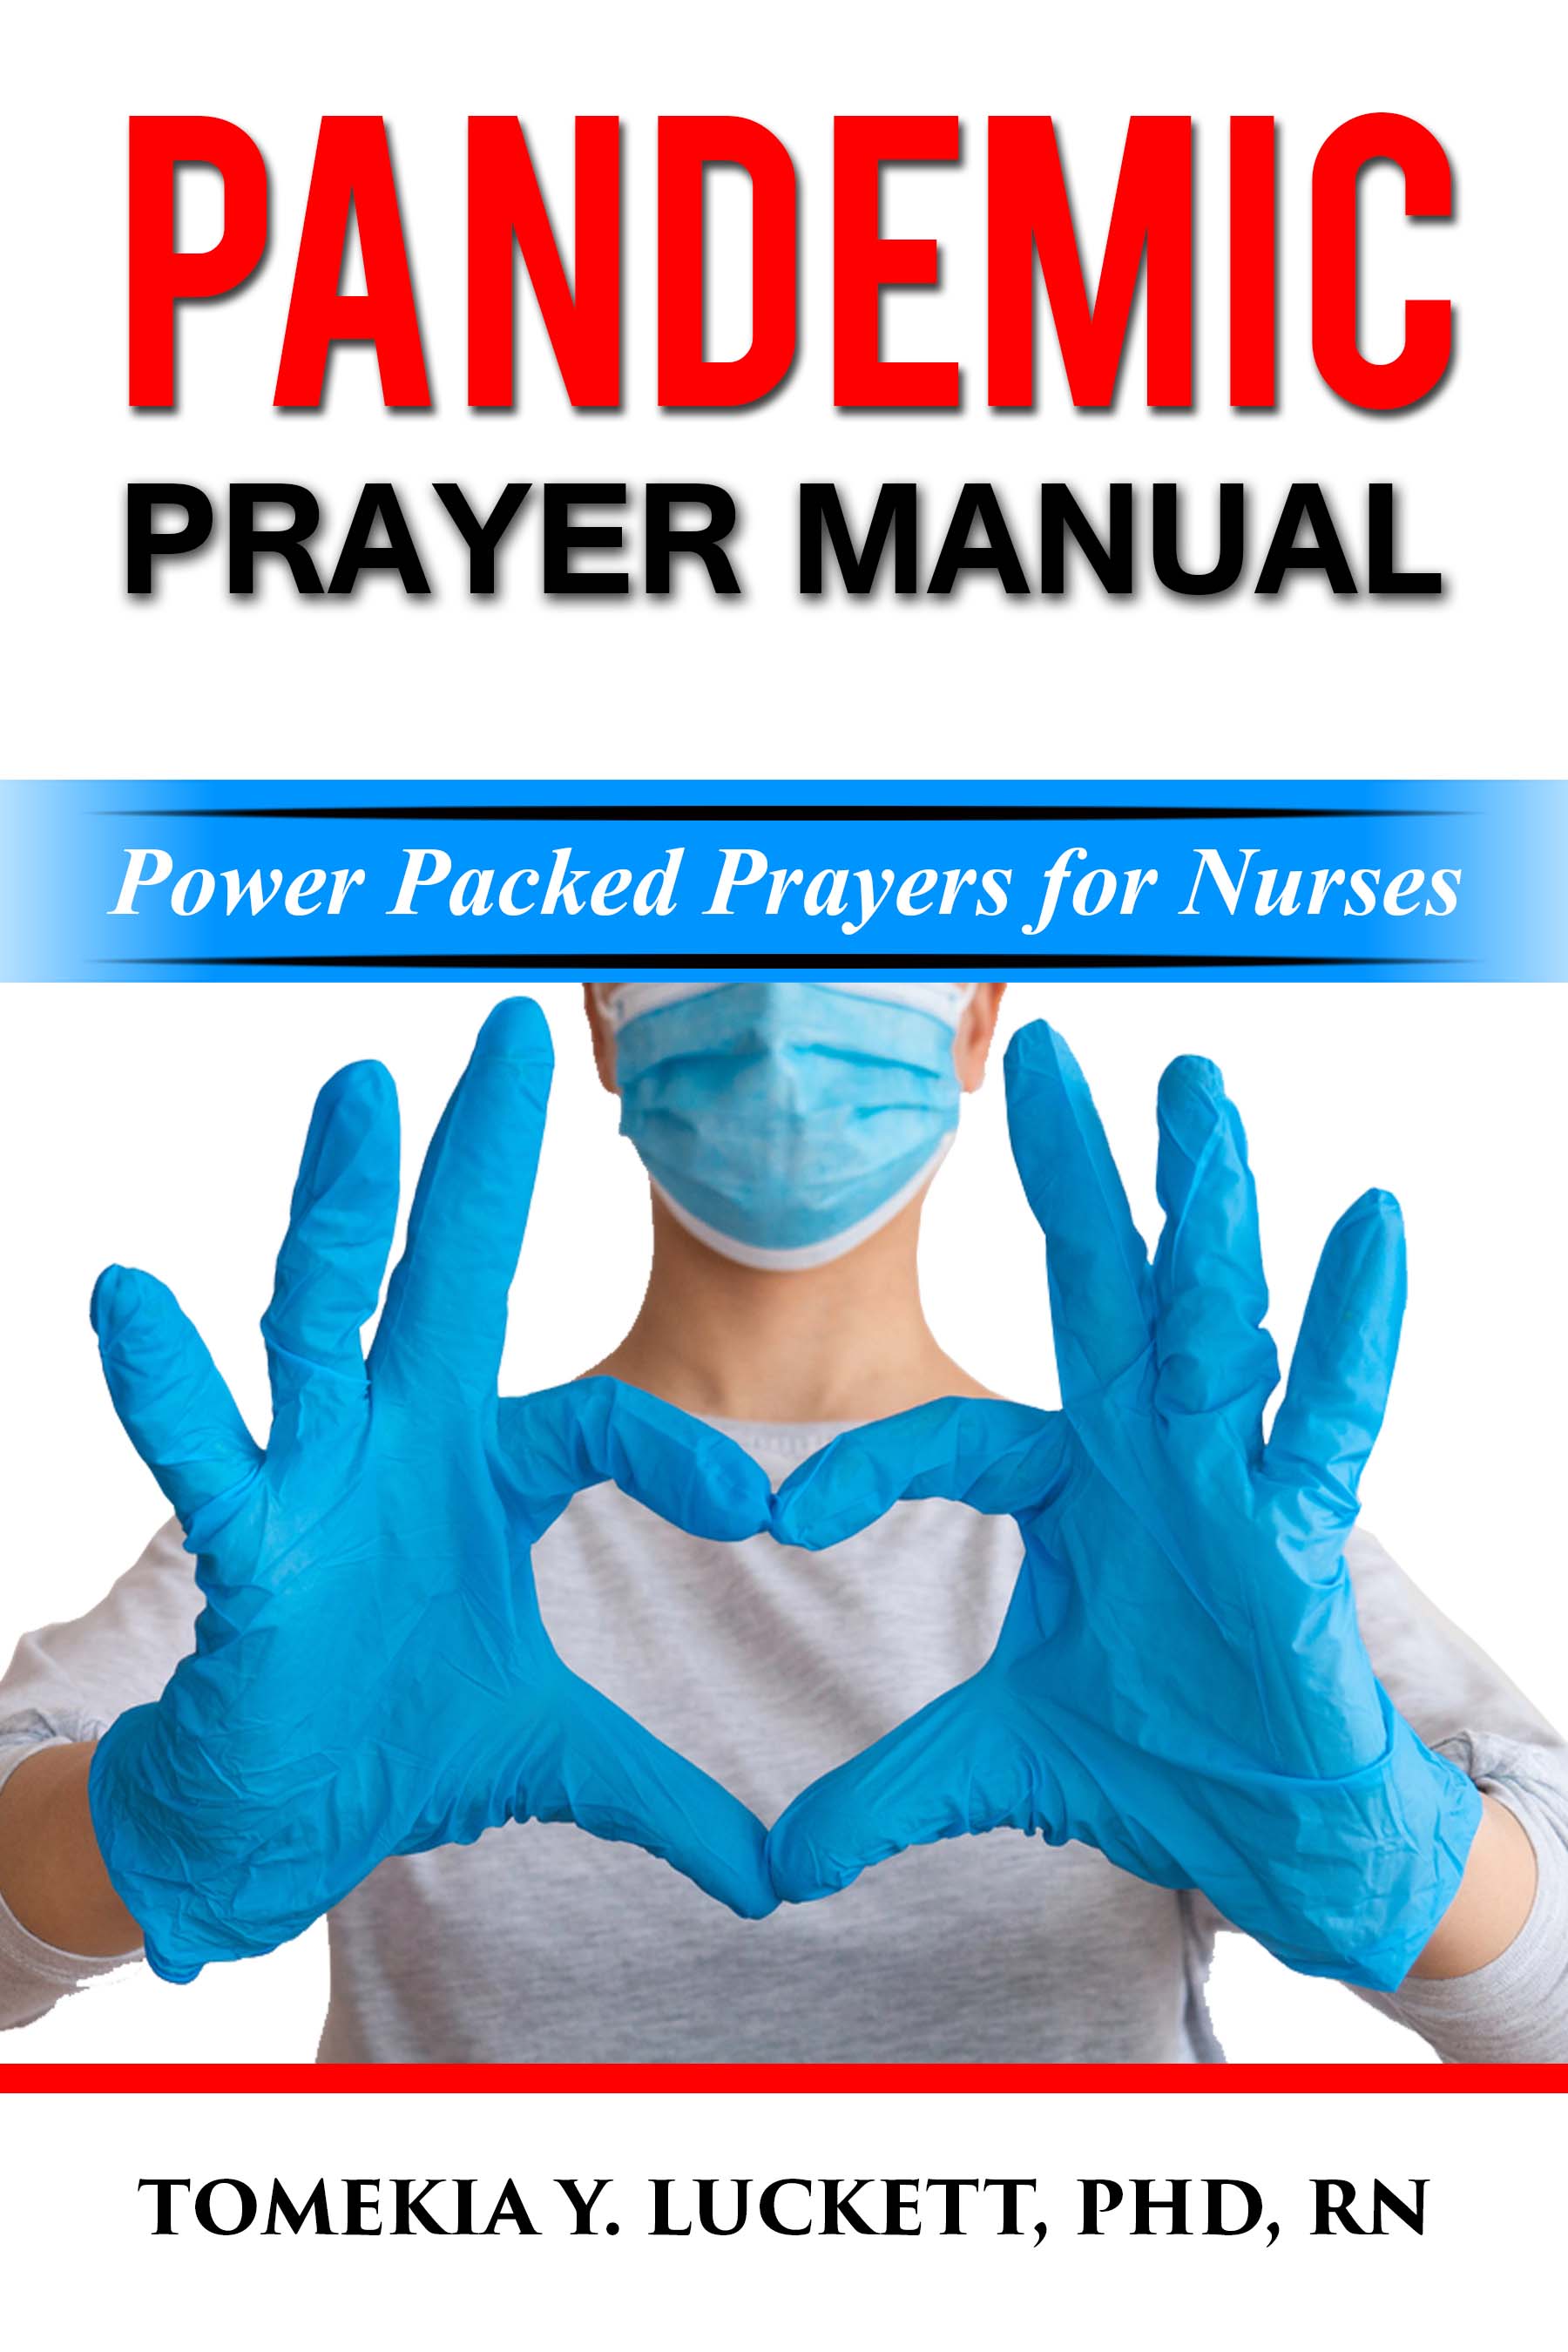 Filled with Courage and Hope, Dr. Tomekia Luckett’s "Pandemic Prayer Manual: Power Packed Prayers for Nurses" is Out Now